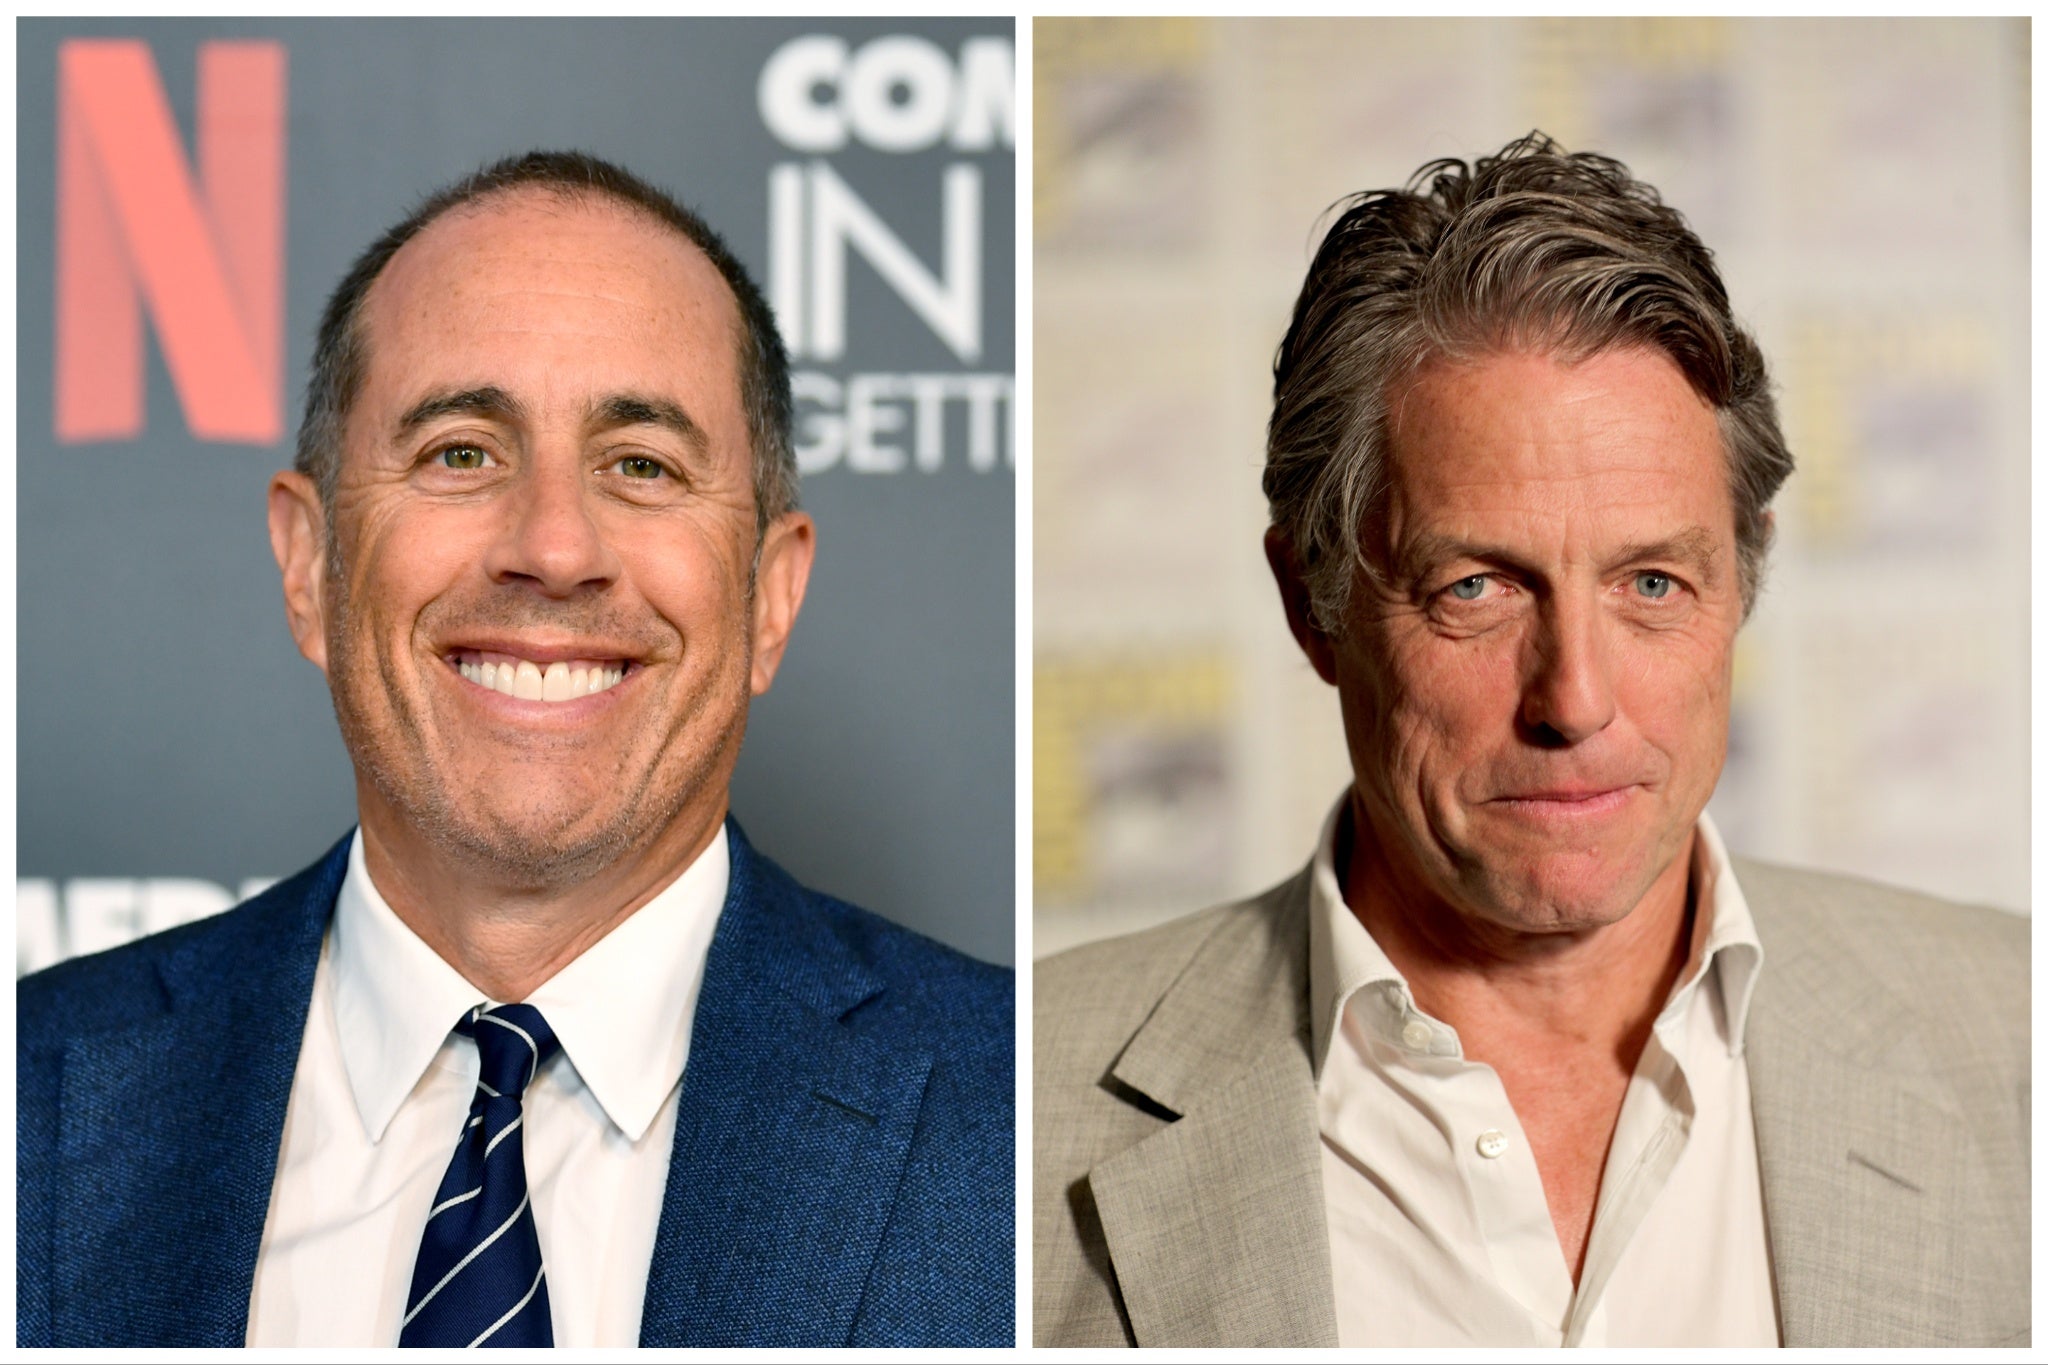 Jerry Seinfeld (left) and Hugh Grant